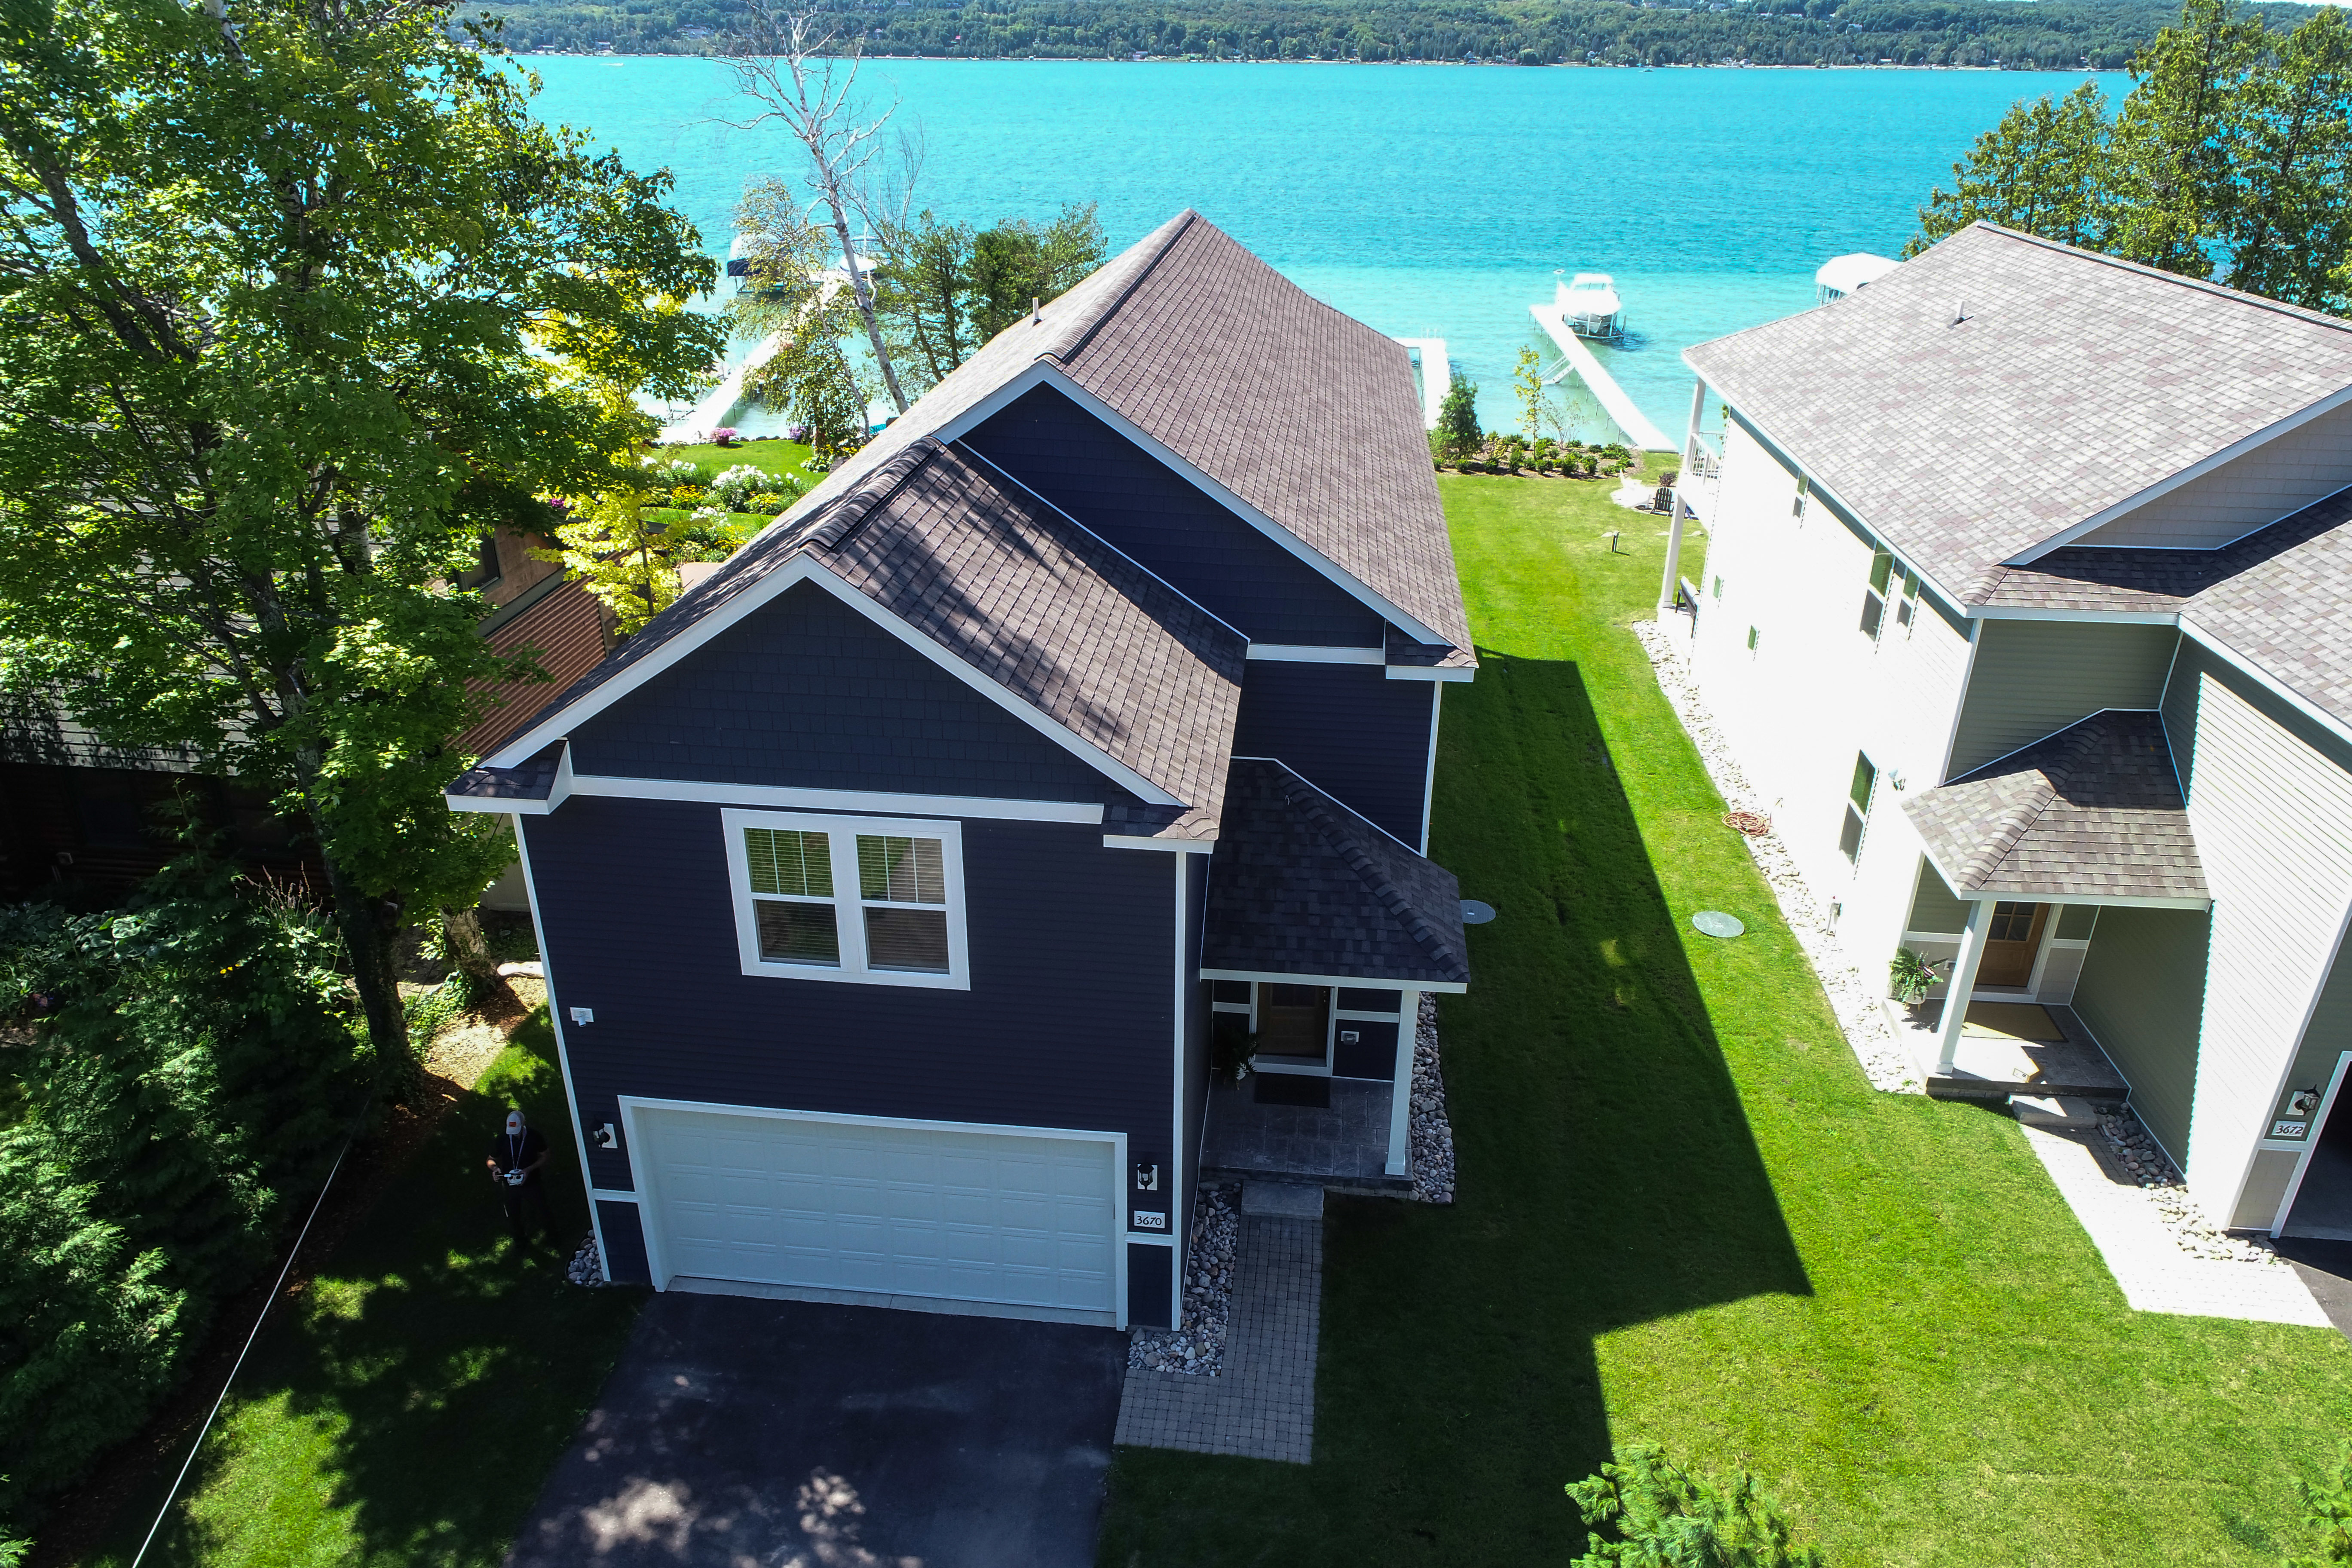 Picture of a home for sale on Lake Charlevoix